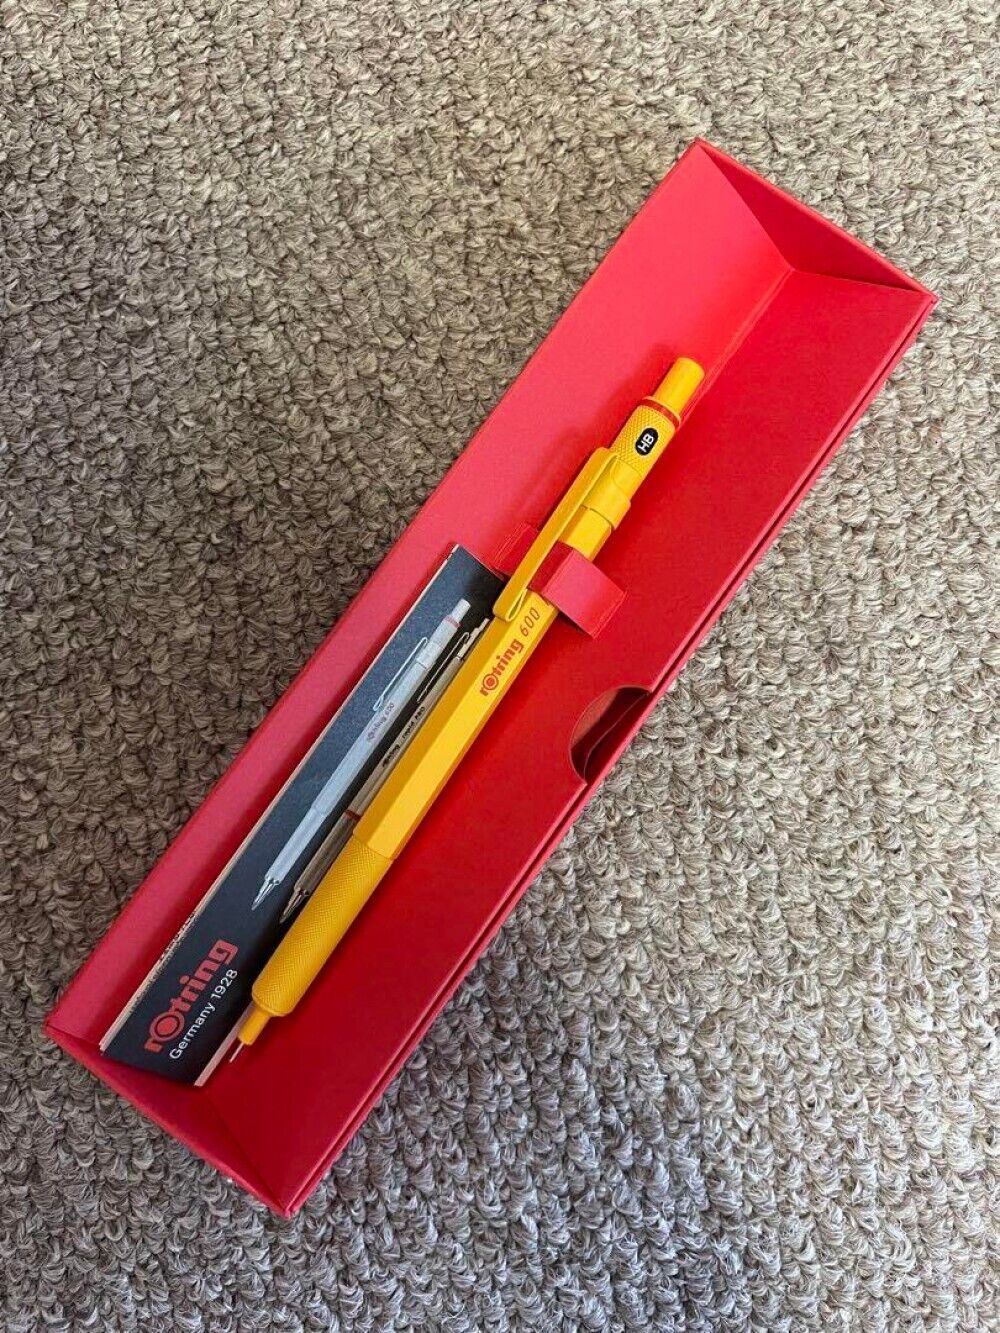 NEW Rotring 600 Loft Limited Matte Yellow Mechanical Pencil 0.5mm Box has dents